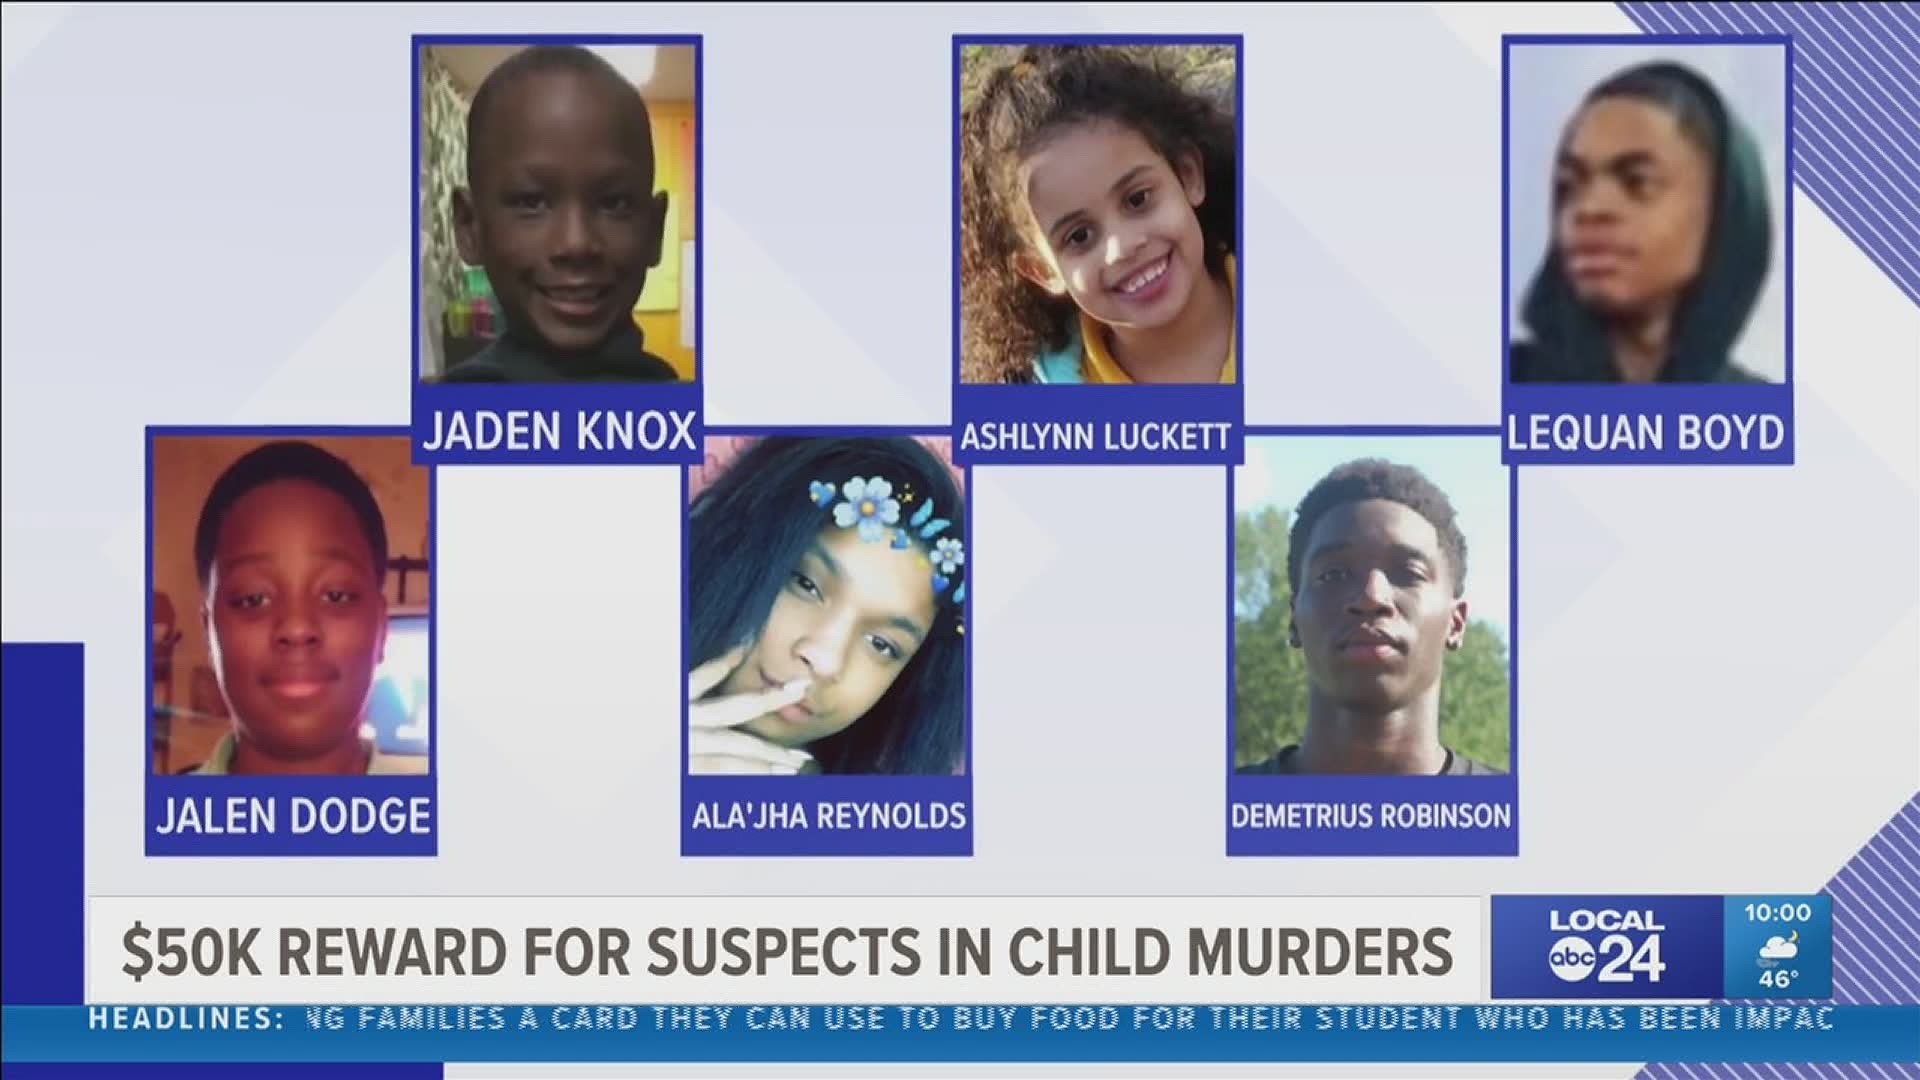 Local law enforcement announced that they have investigated an unusually high number of child murders cases this year.